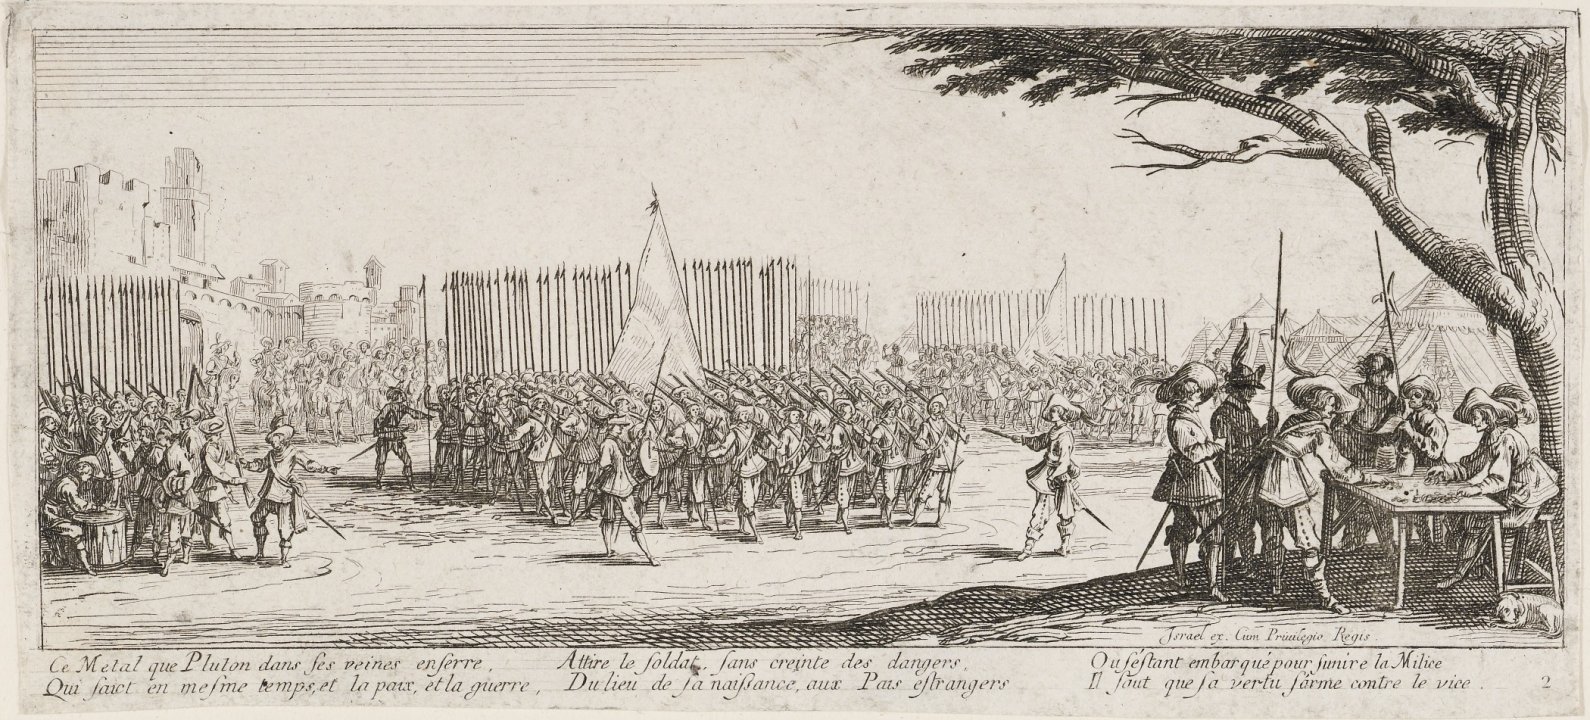 The Enrollment of the Troops from the series The Miseries and Misfortunes of War